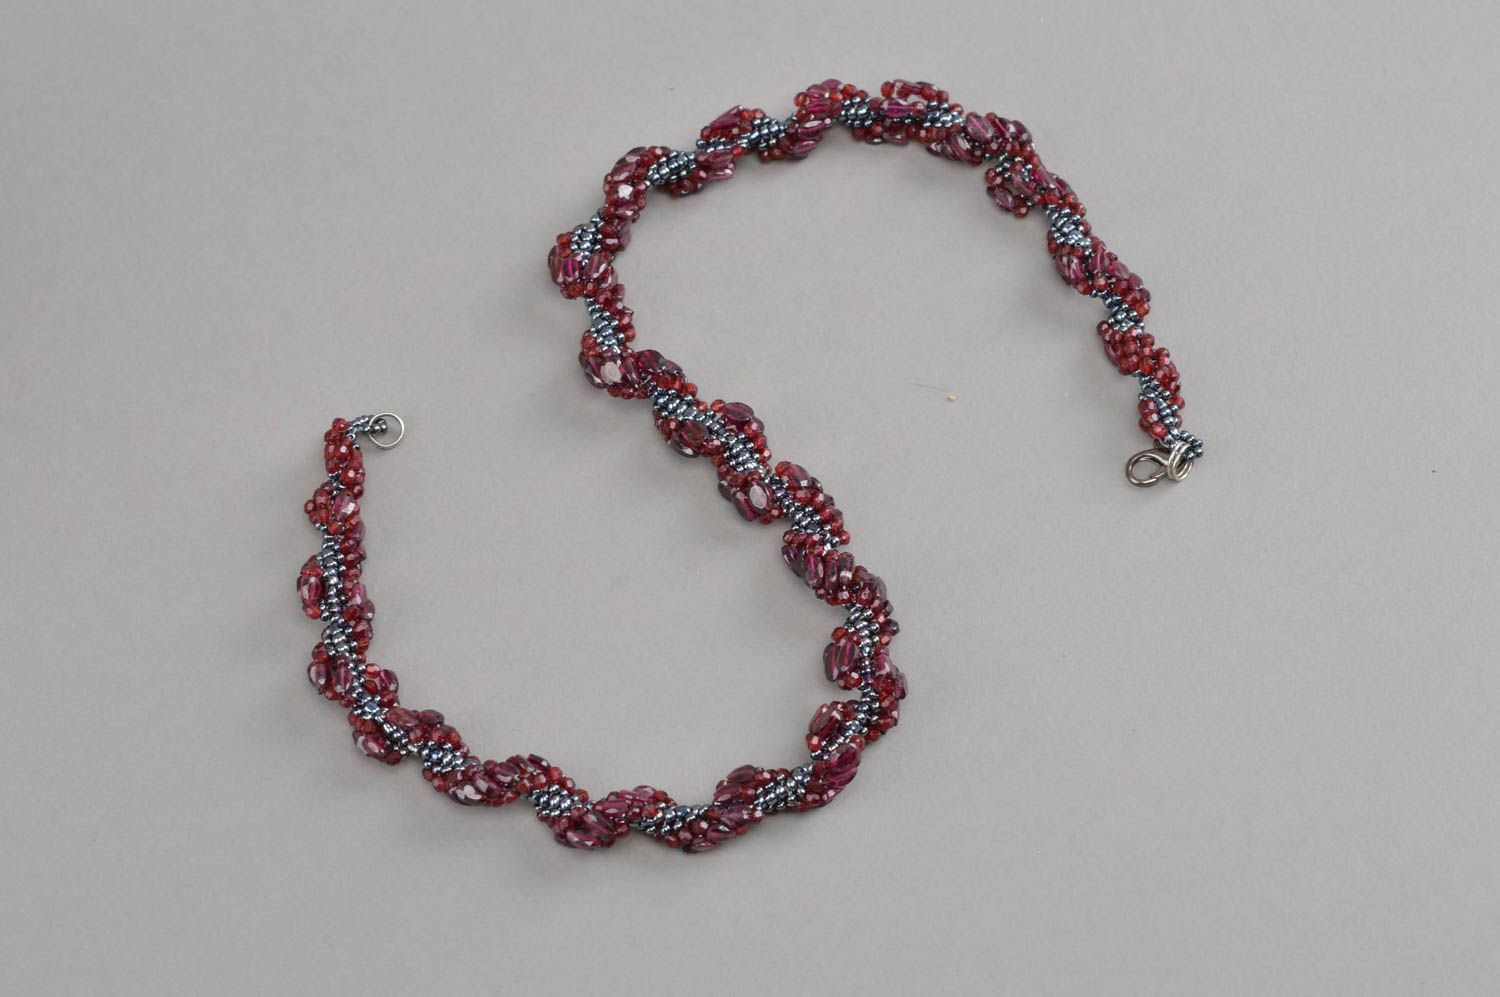 Handmade necklace with garnet beads jewelry with natural stones for women photo 4